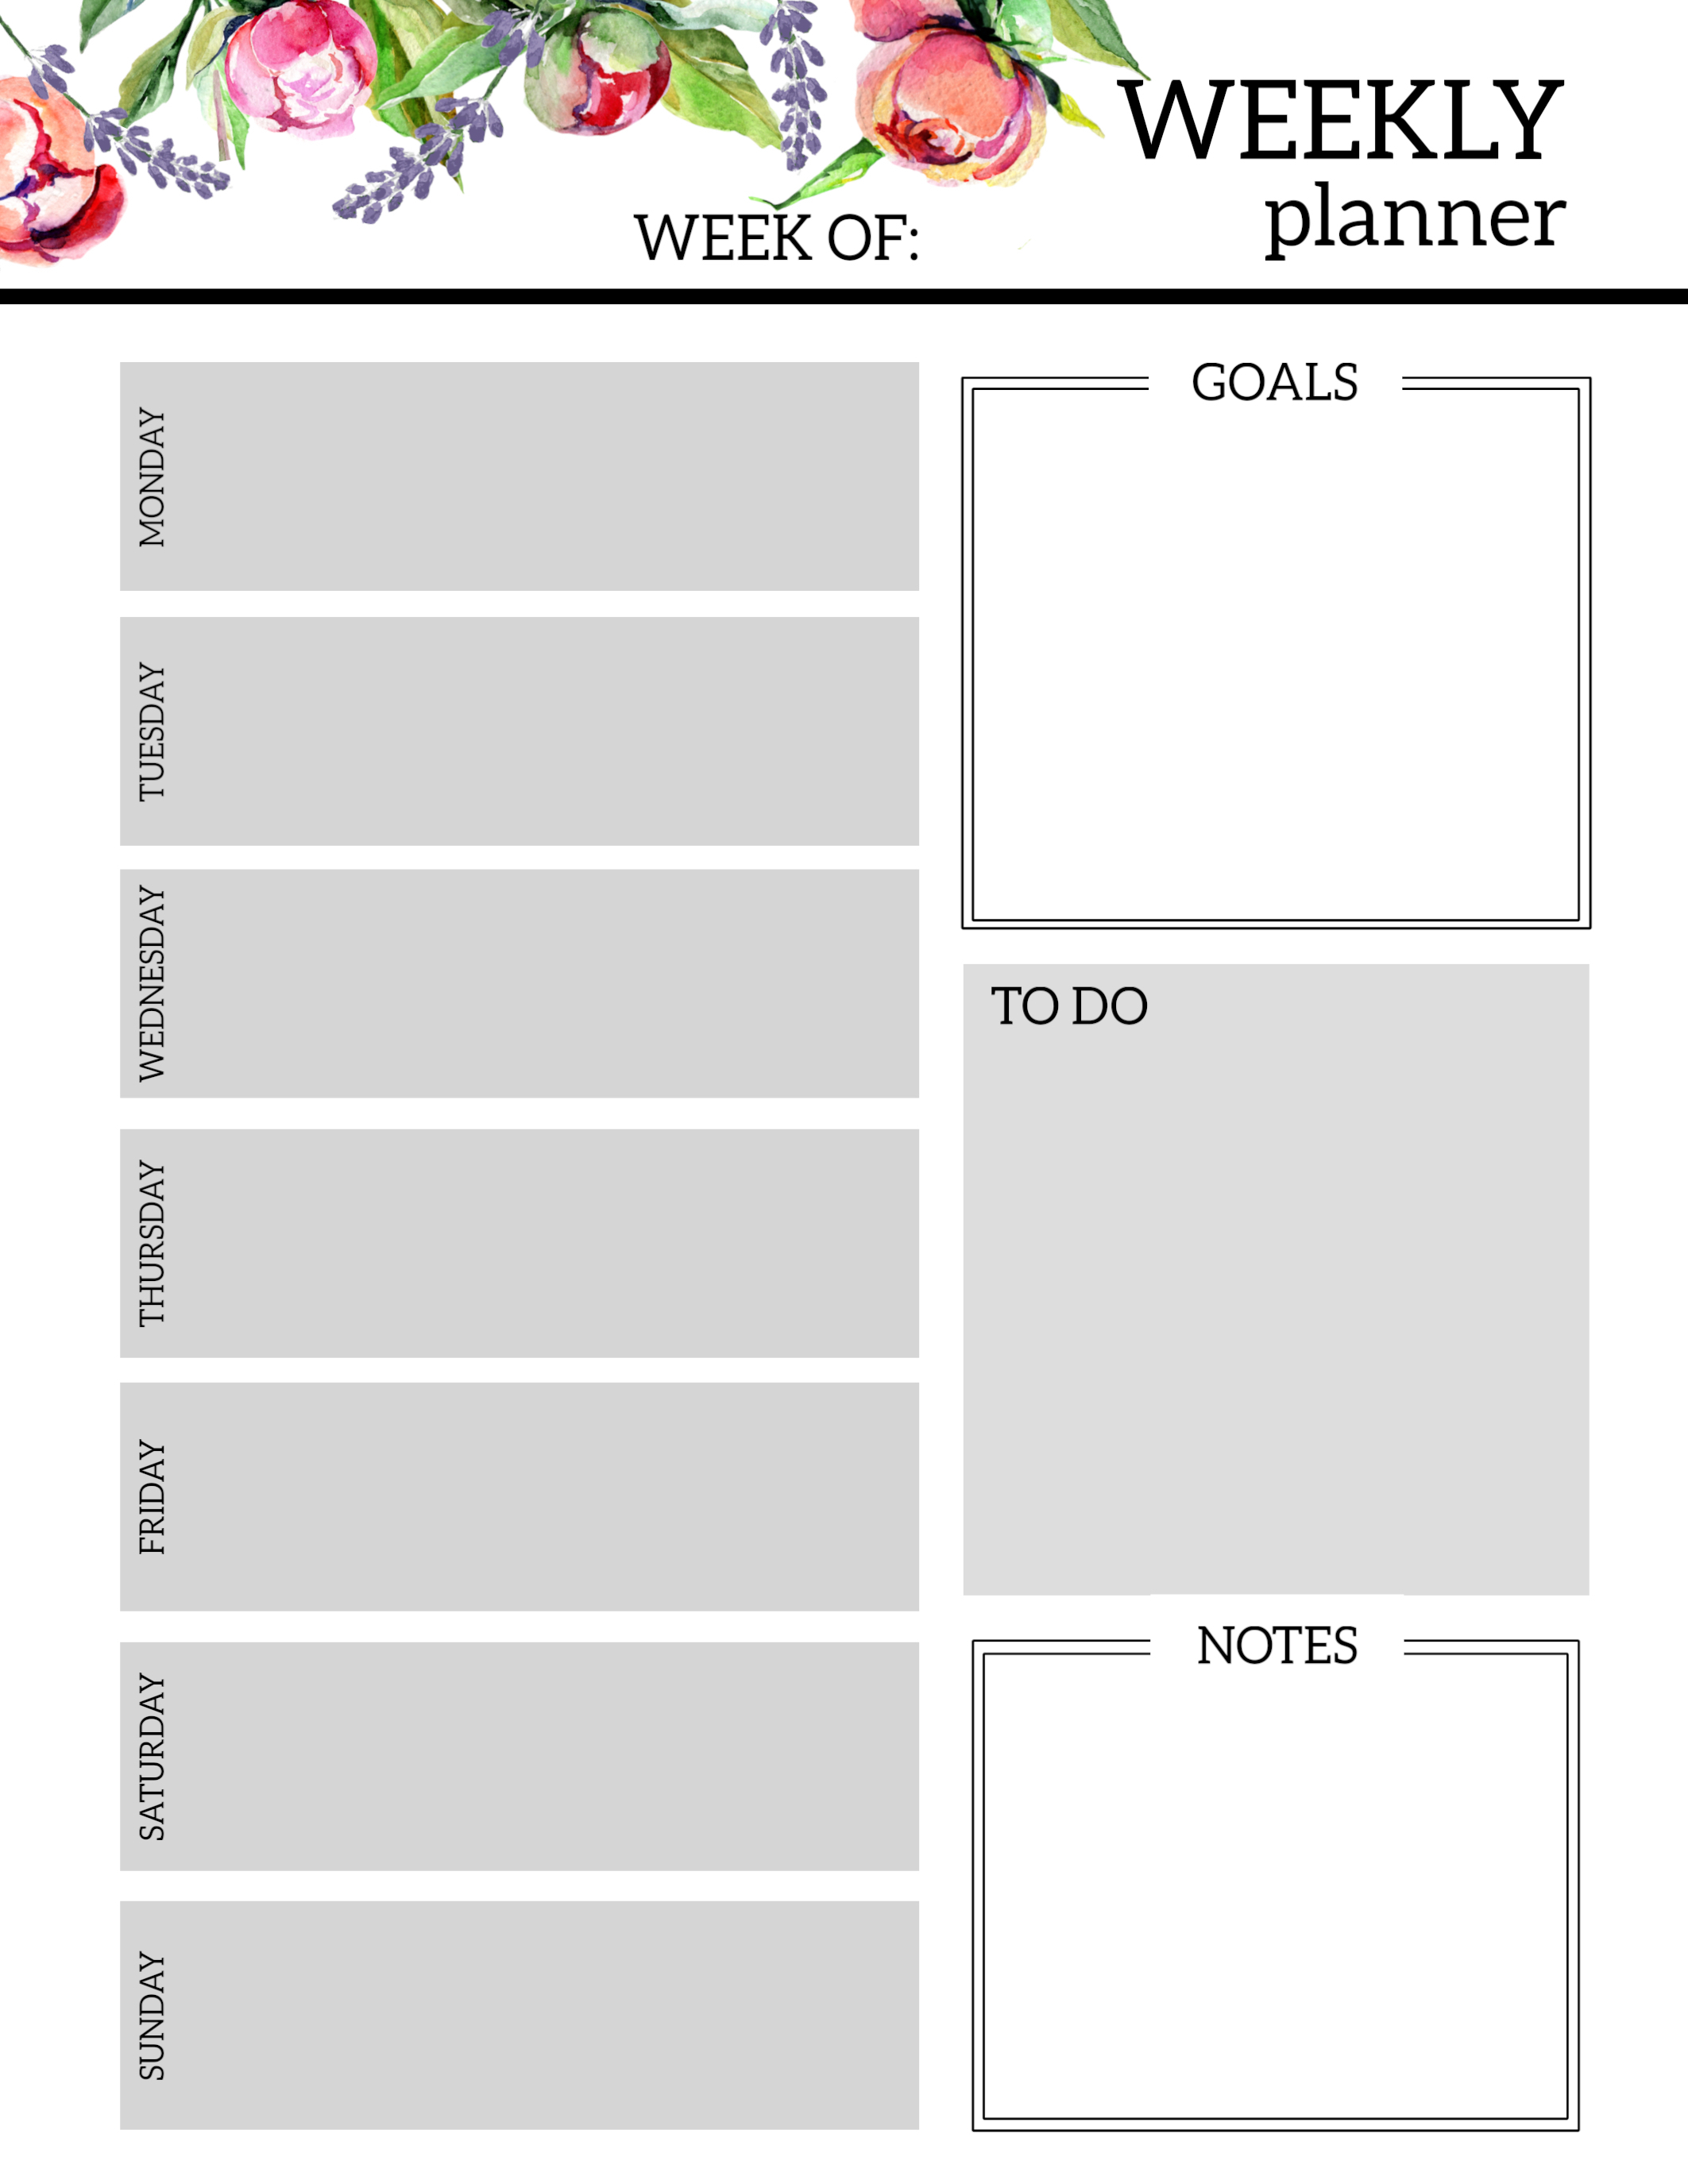 Free E Weekly Planner Template Floral Paper Trail Design